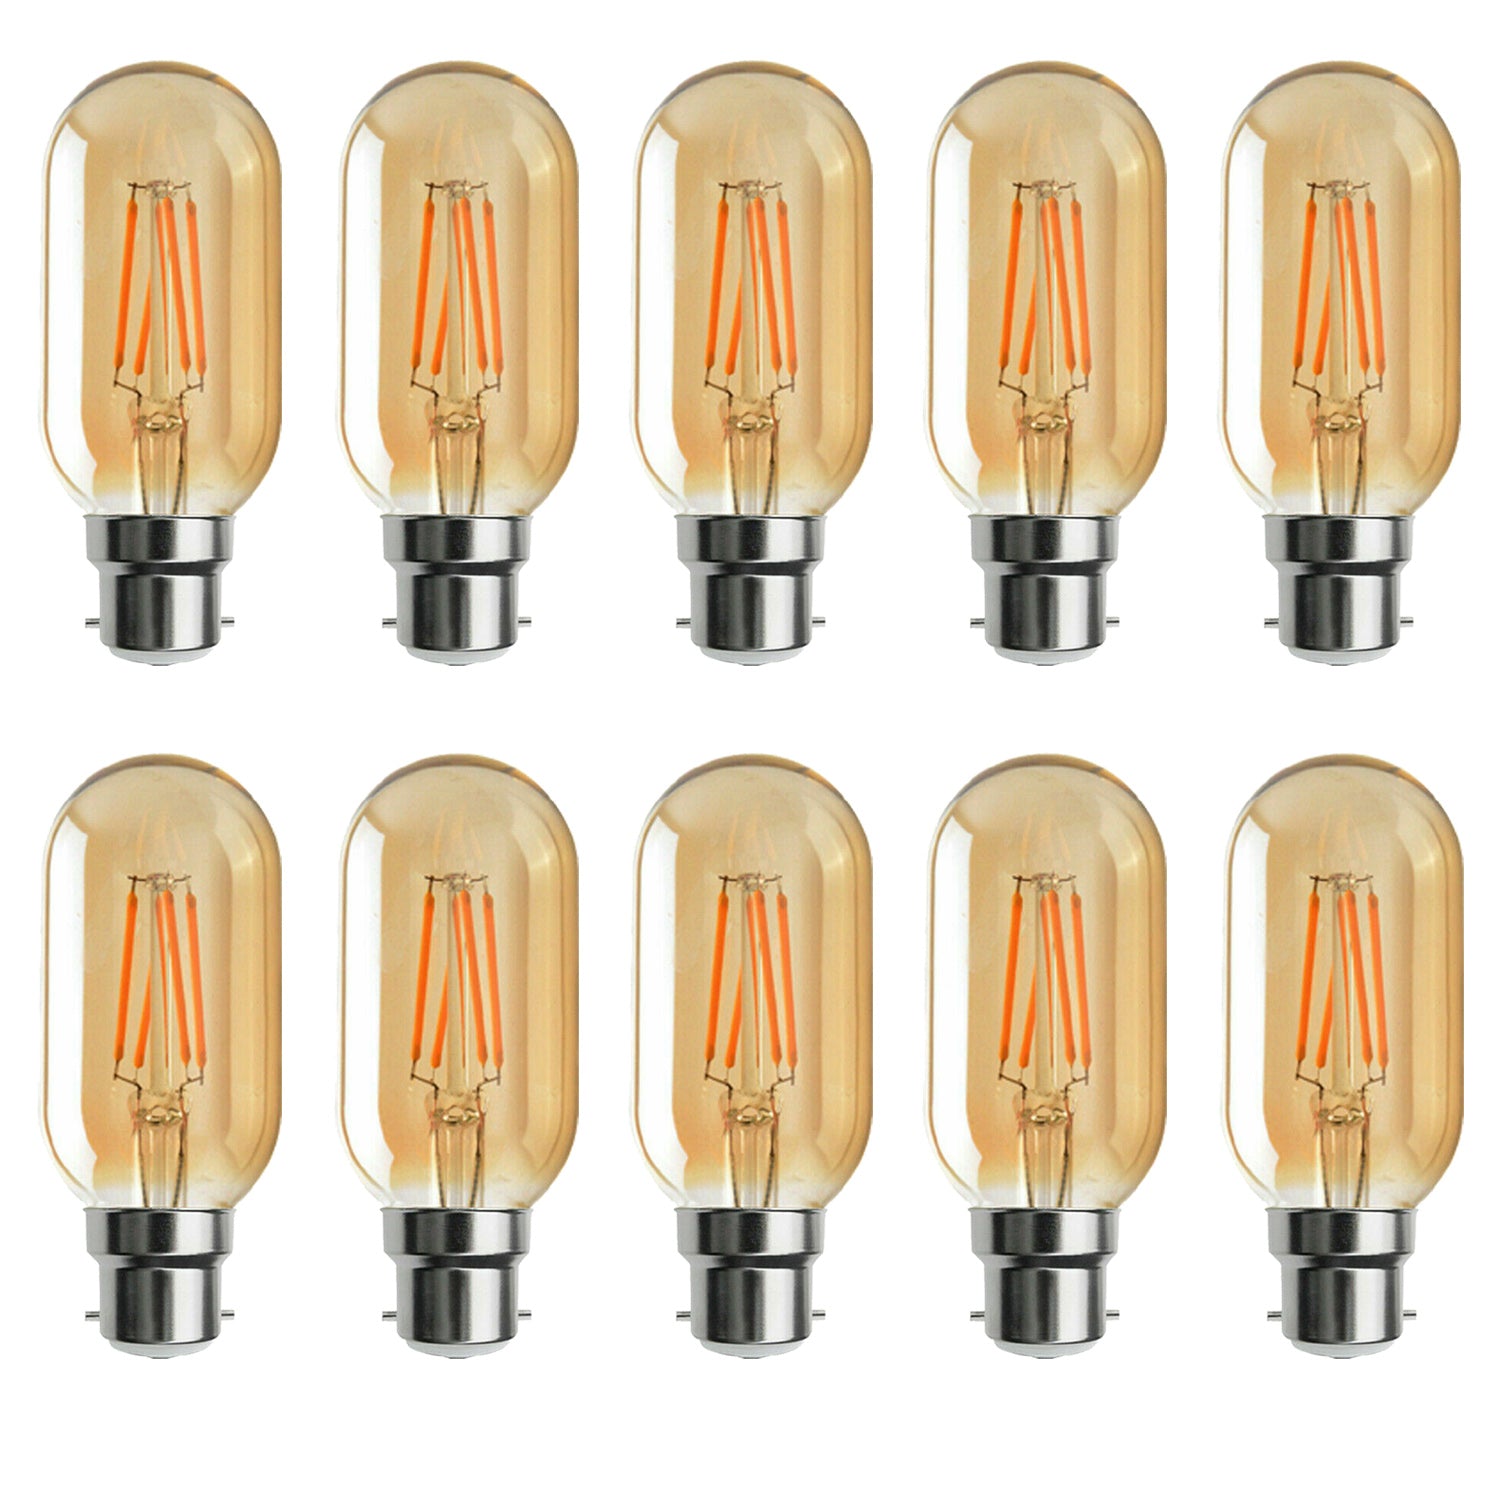 4W T45 B22 LED Dimmable Light - 10 pack